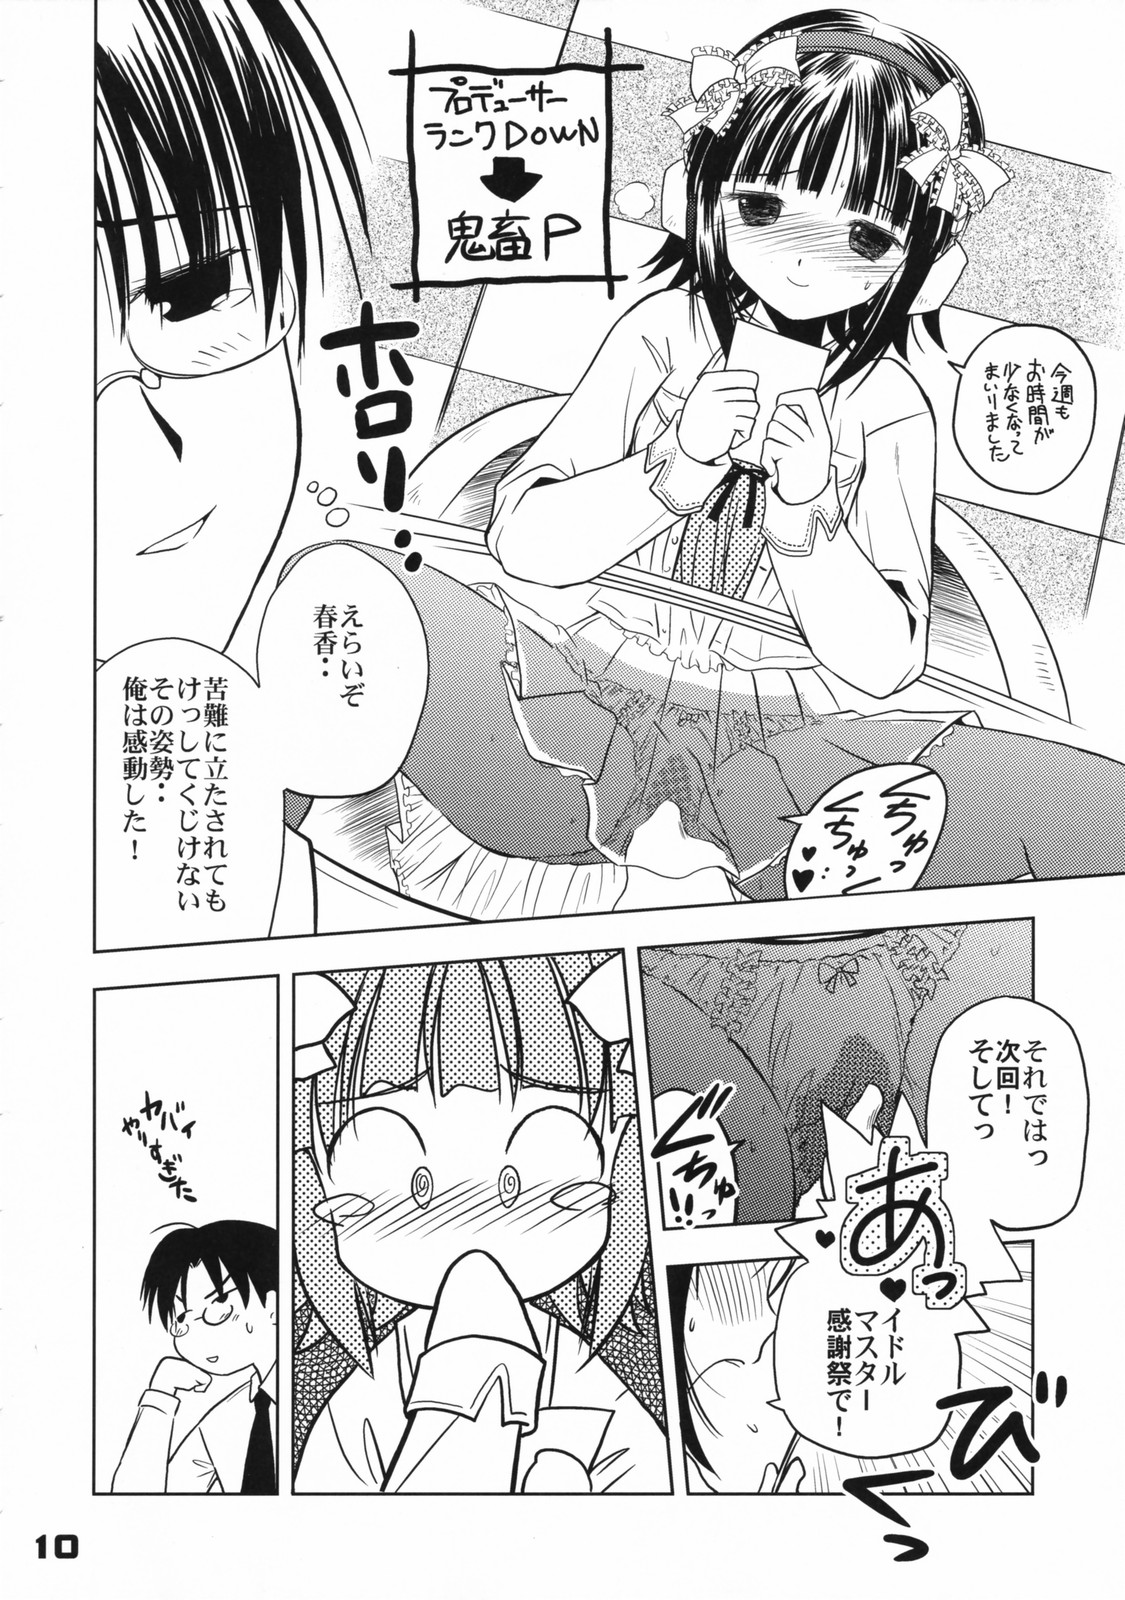 (C72) [Quarter View (Jinnoujyou)] The Idol×sun×idol (THE iDOLM@STER) page 9 full